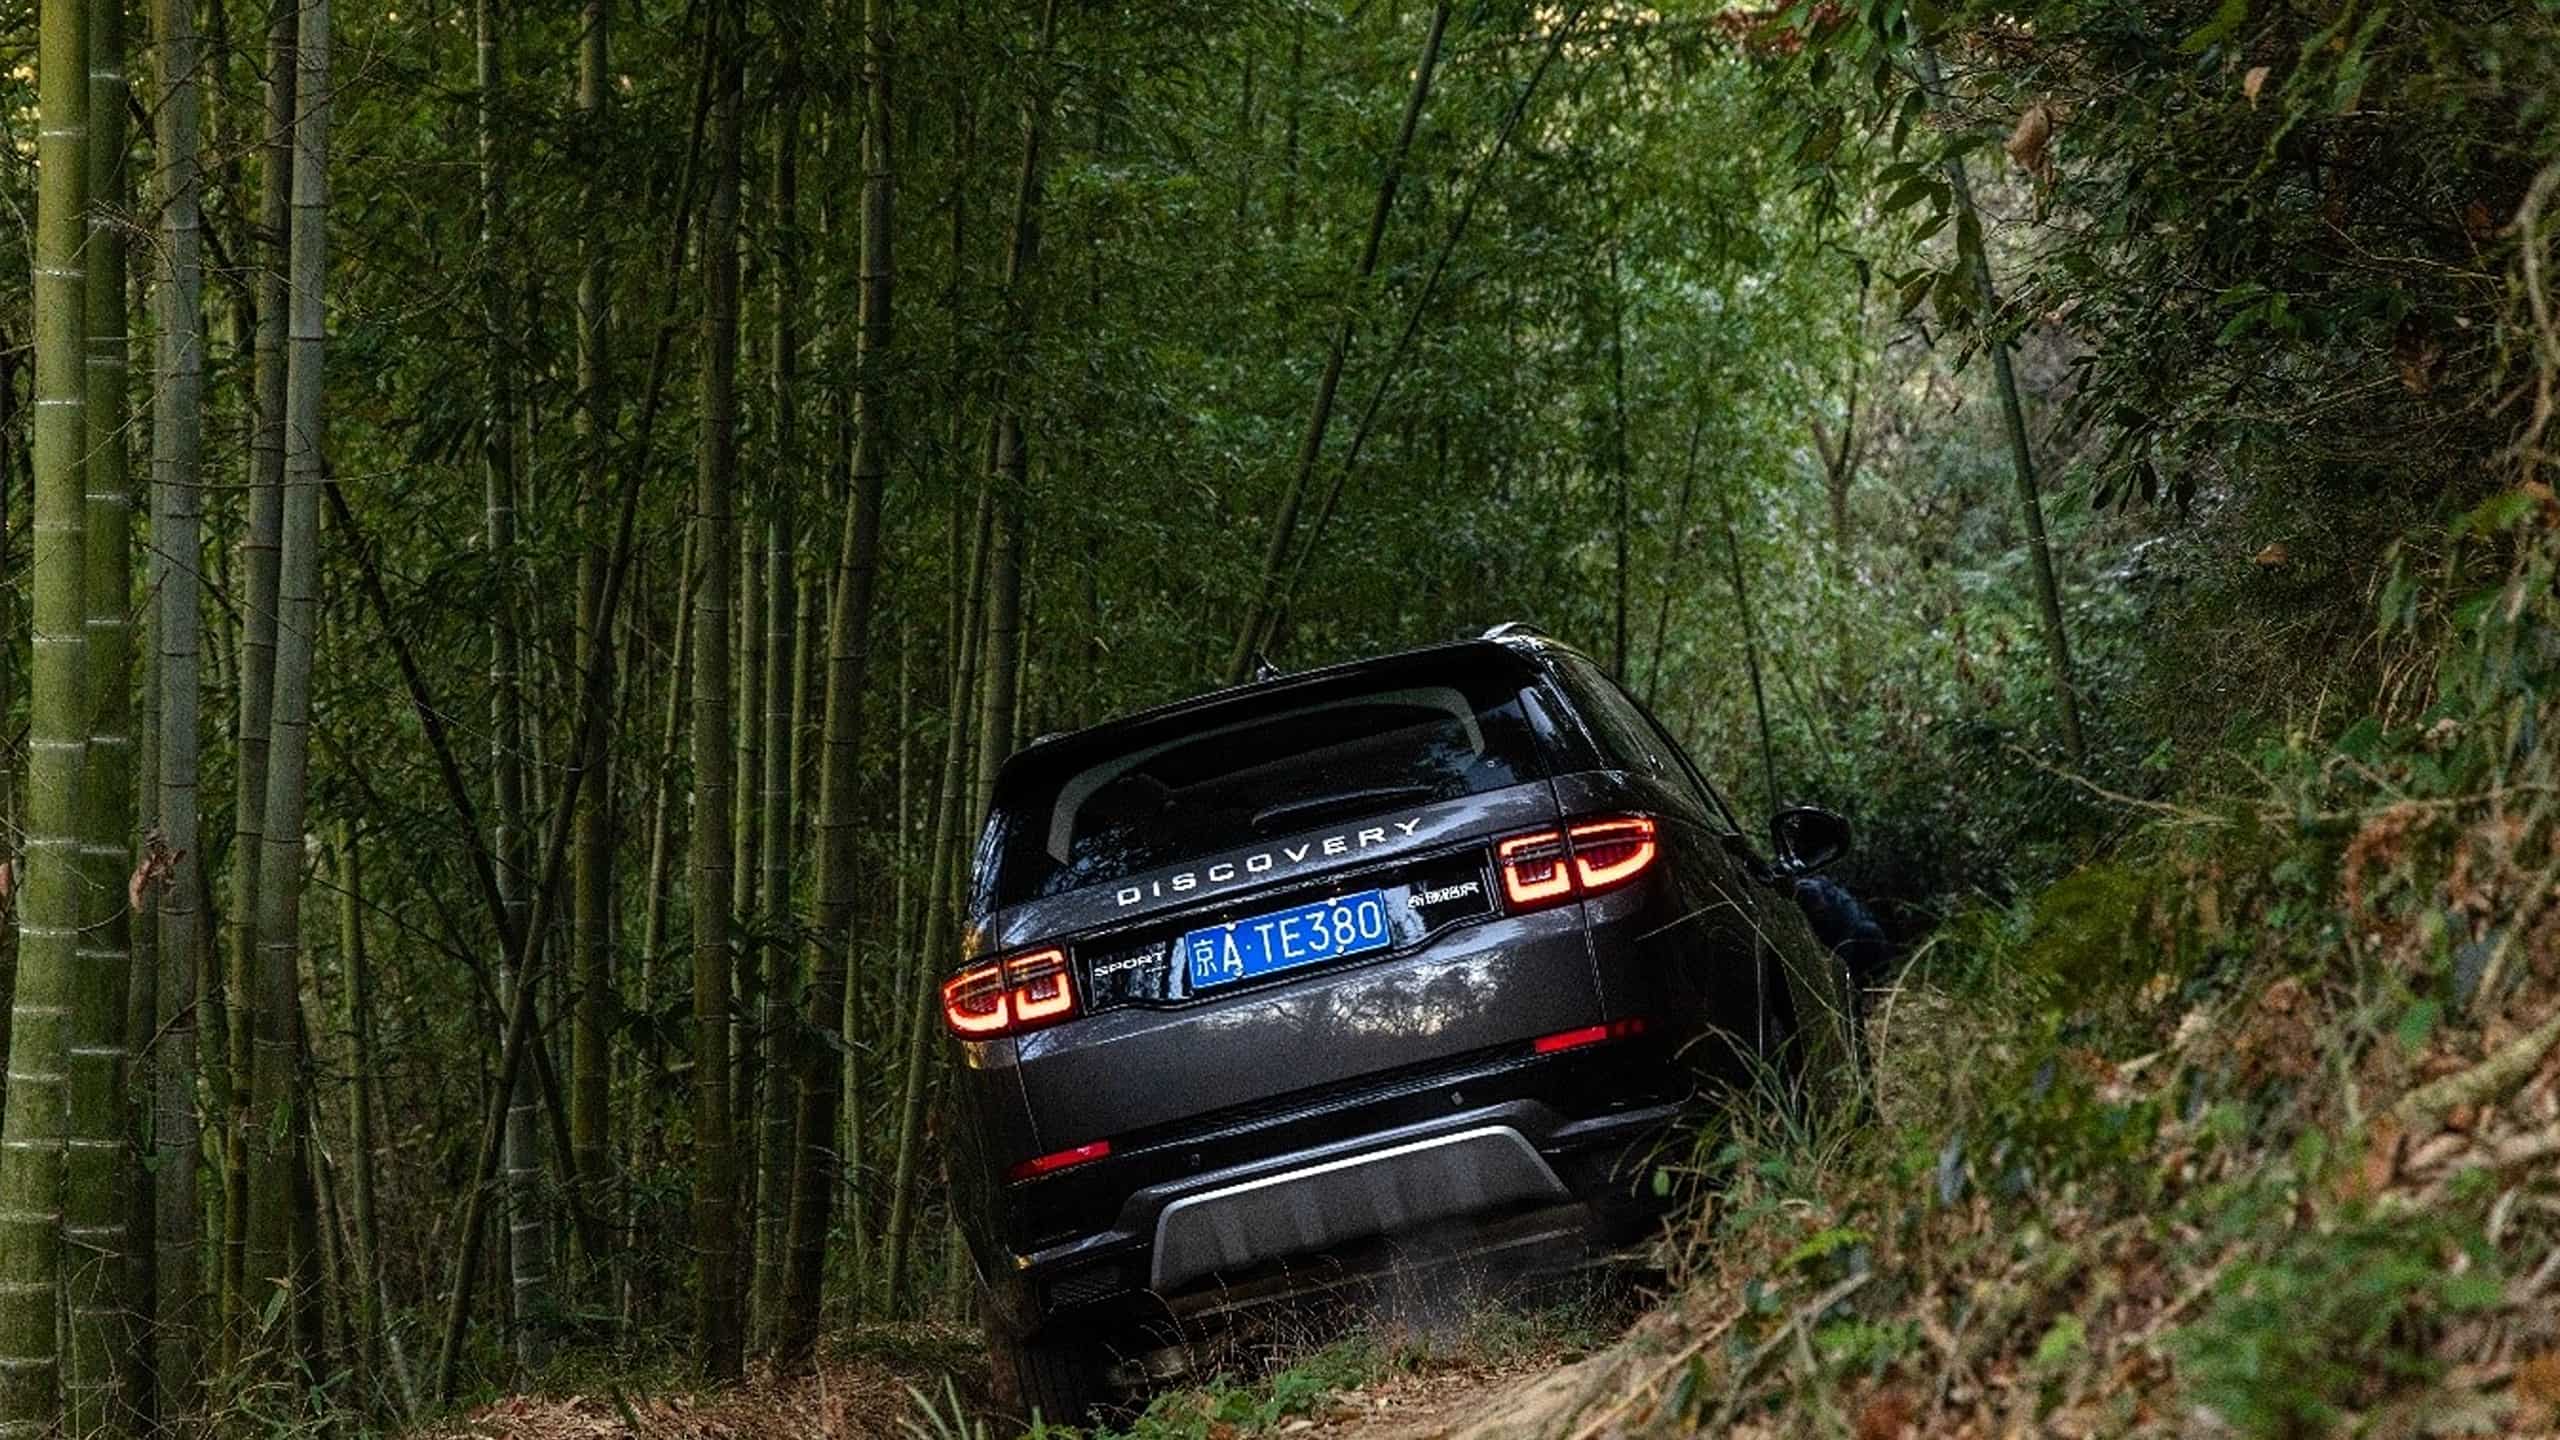 Land Rover Discovery Sport has excellent all-terrain capabilities